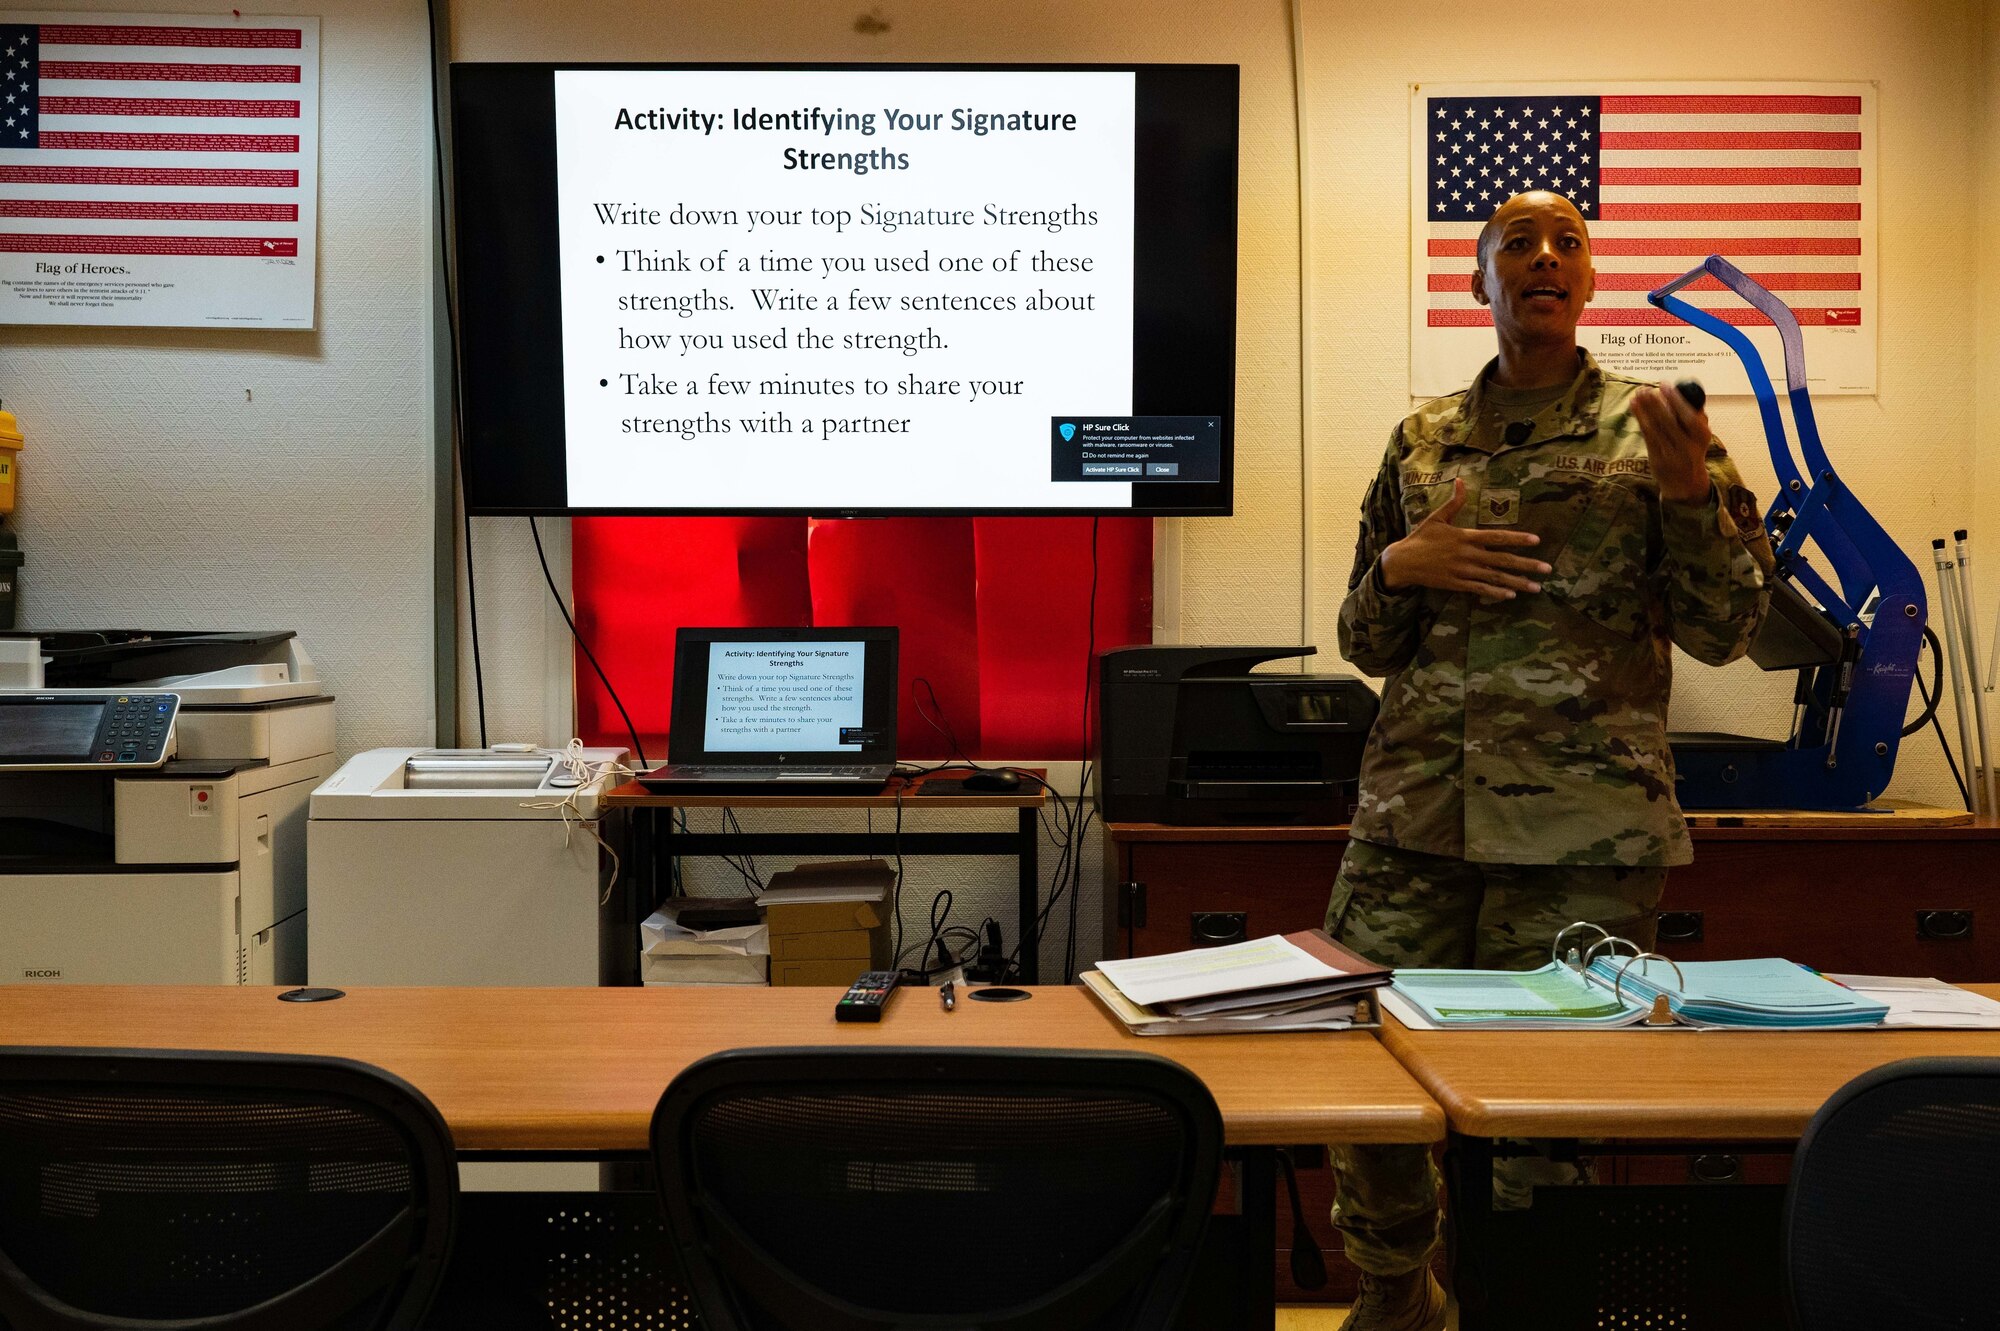 U.S. Air Force Tech. Sgt. Monique Hunter, a master resiliency trainer with the 9th Air Force Central Command, teaches an MRT course at the Airman and Family Readiness Center on Al Udeid Air Base, Qatar, on July 28, 2022. Hunter spoke on the subject of strength during the course pictured and allowed for detailed discussion during all her courses to enable individual growth and a better communal understanding of one another. (U.S. Air Force photo by Staff Sgt. Dana Tourtellotte)